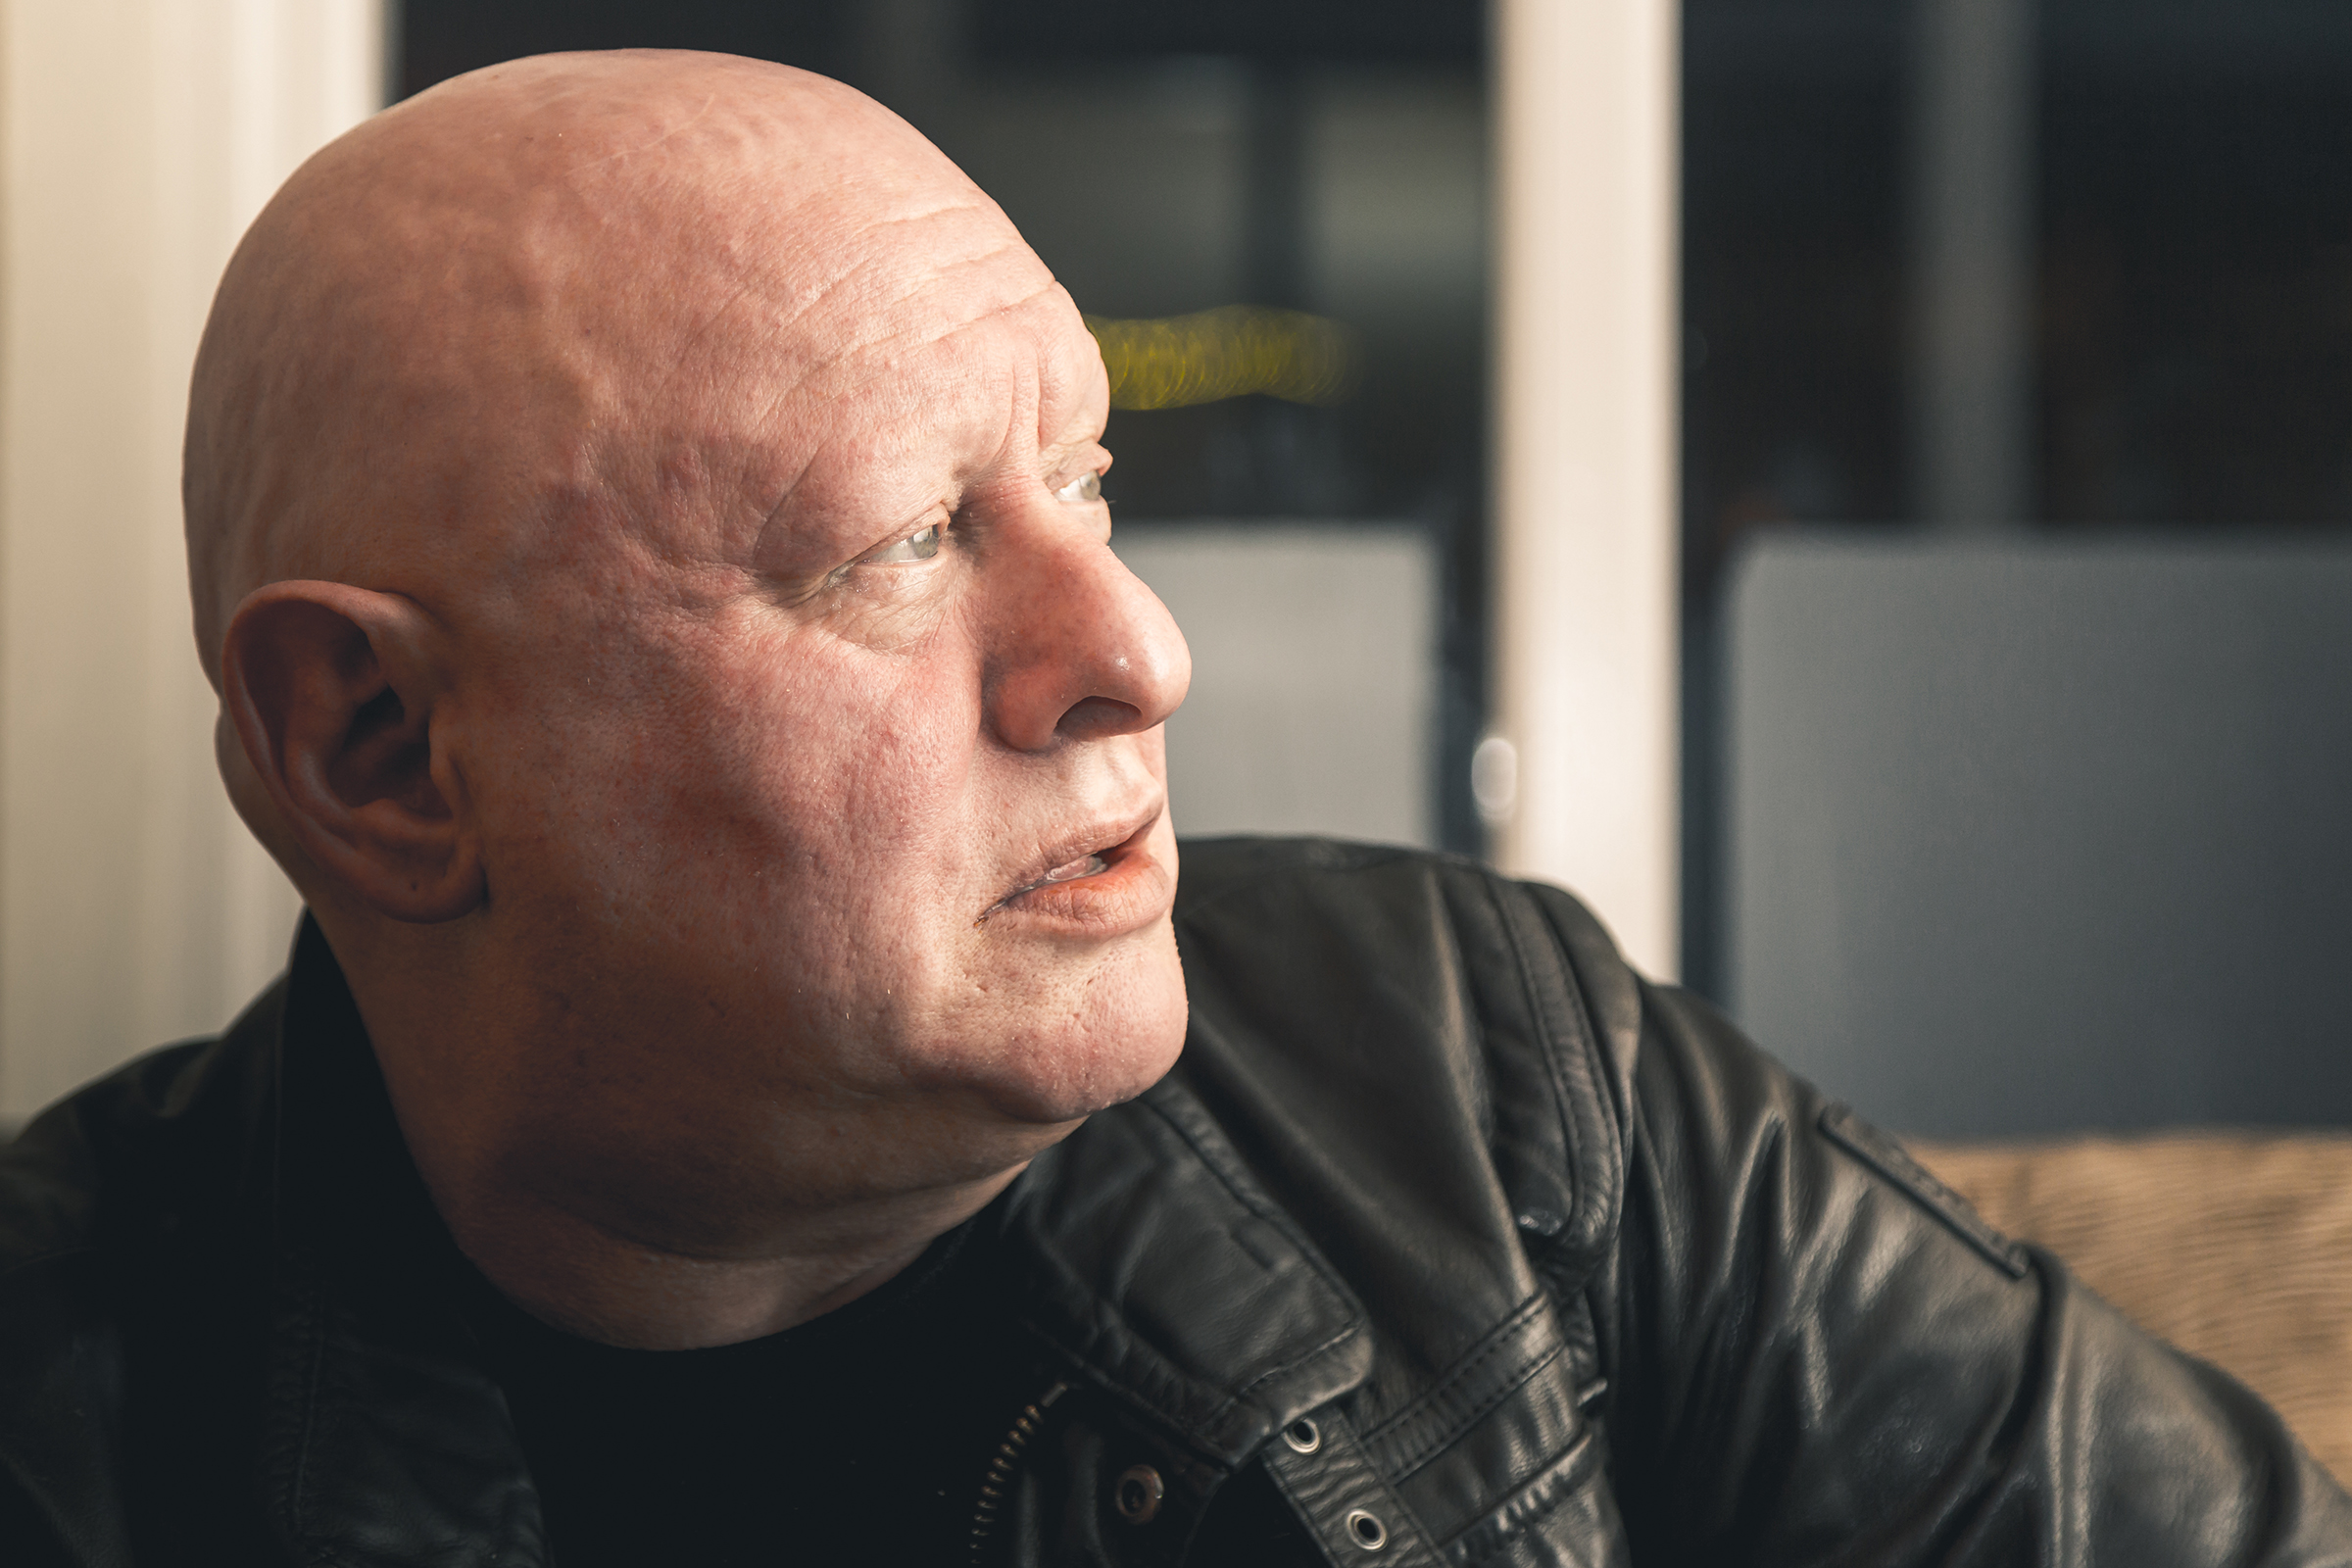 SHAUN RYDER announces new solo album 'Visits From Future Technology' - out August 20th | XS Noize | Online Music Magazine